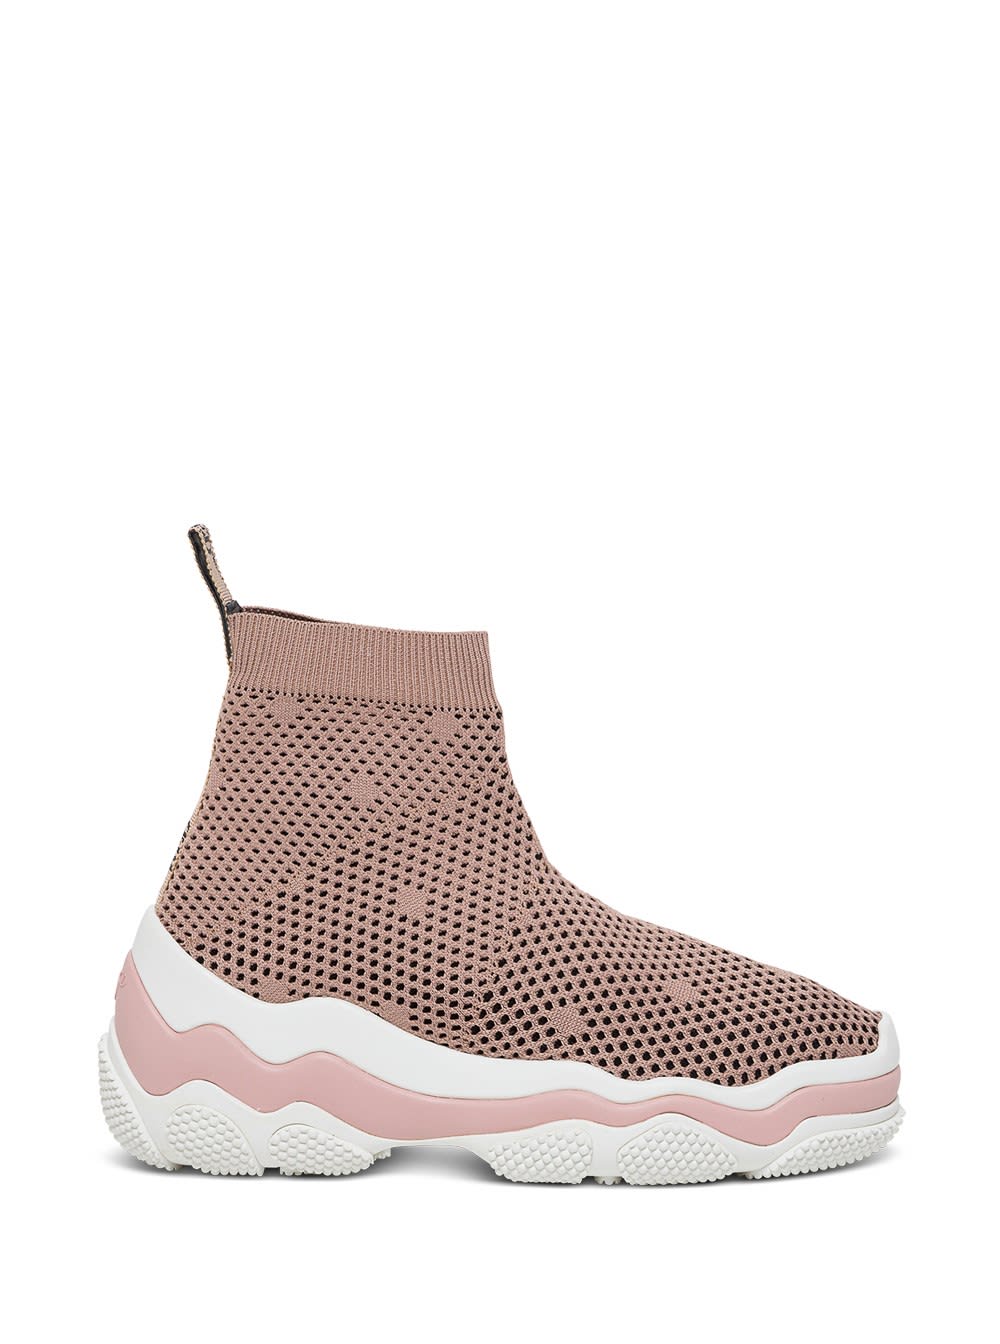 RED Valentino Stretch Pois Desprit Knit Sneakers